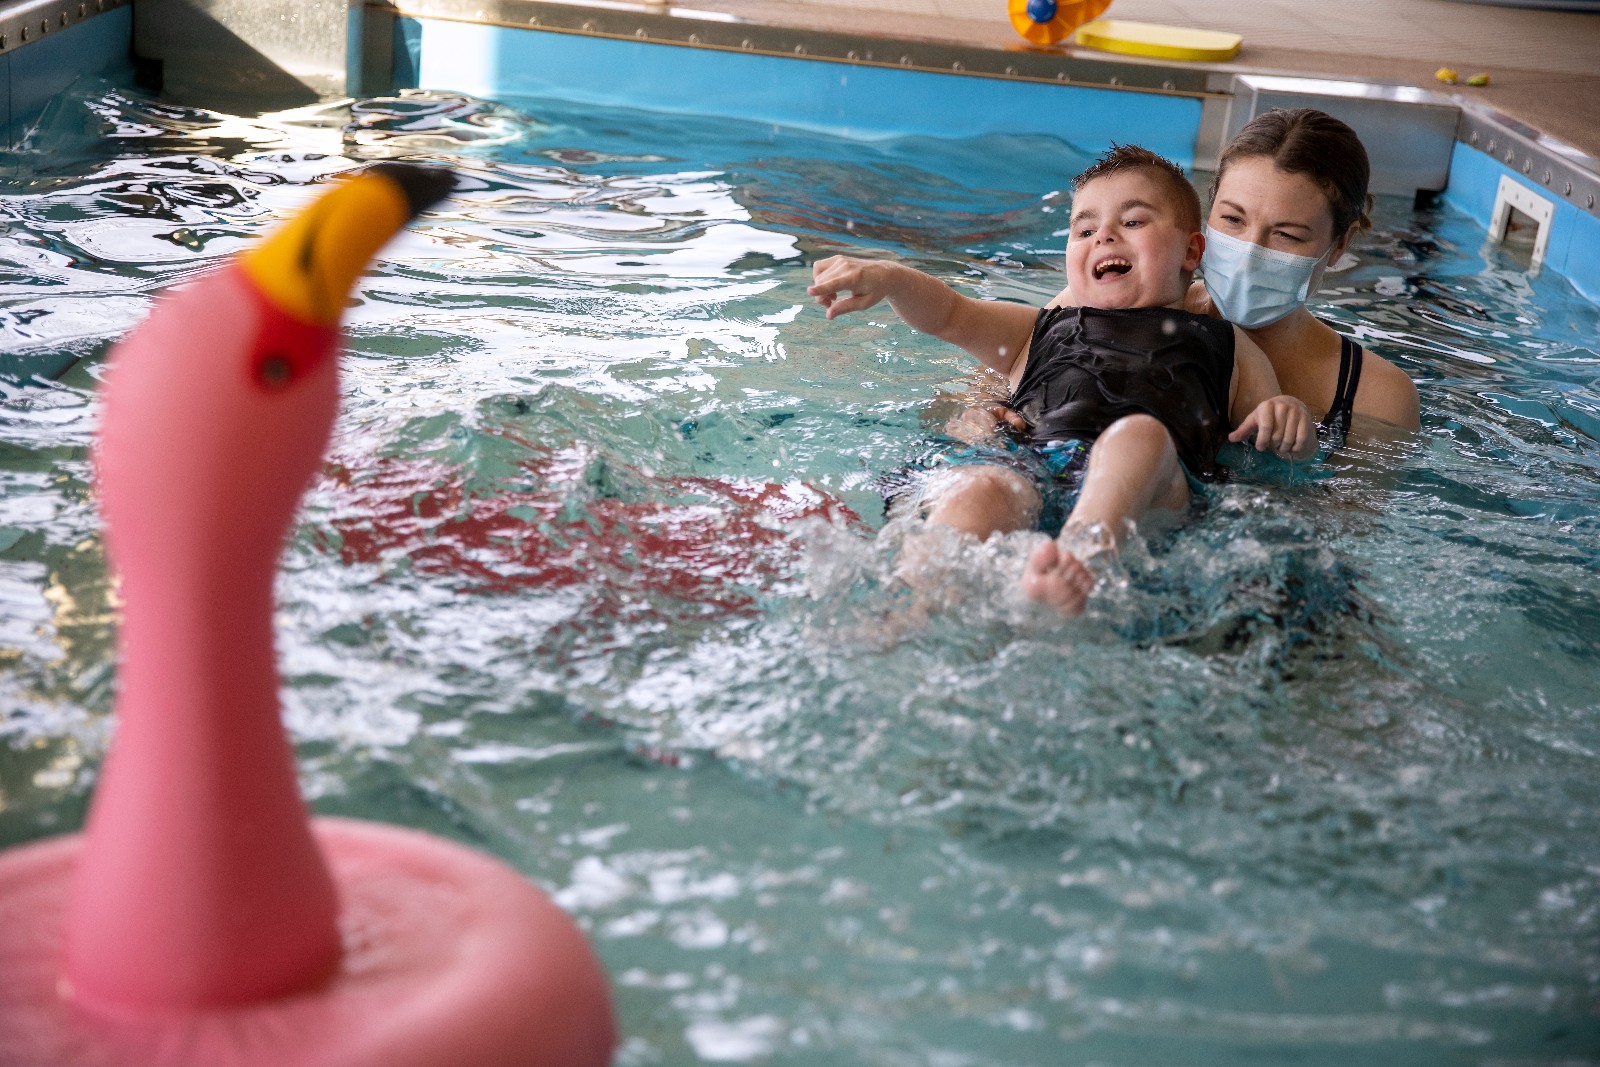 Penn State Health physical therapist Taylor Swingle holds Miracle Child Gannon in the pool during an aquatherapy session